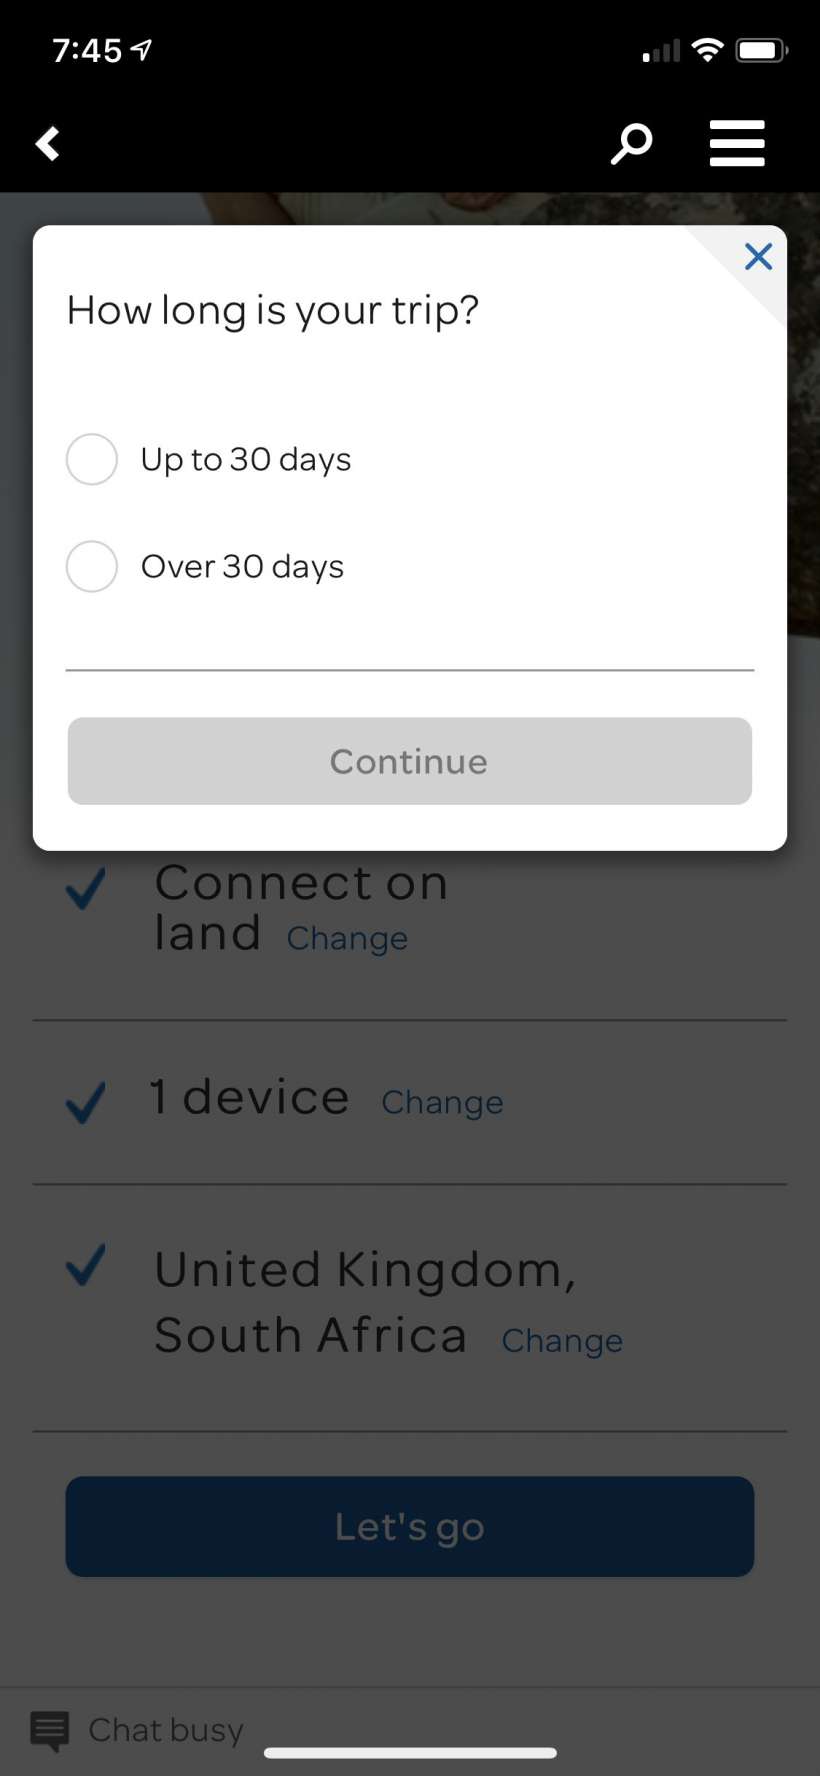 How to enable AT&T Passport for international travel on iPhone.